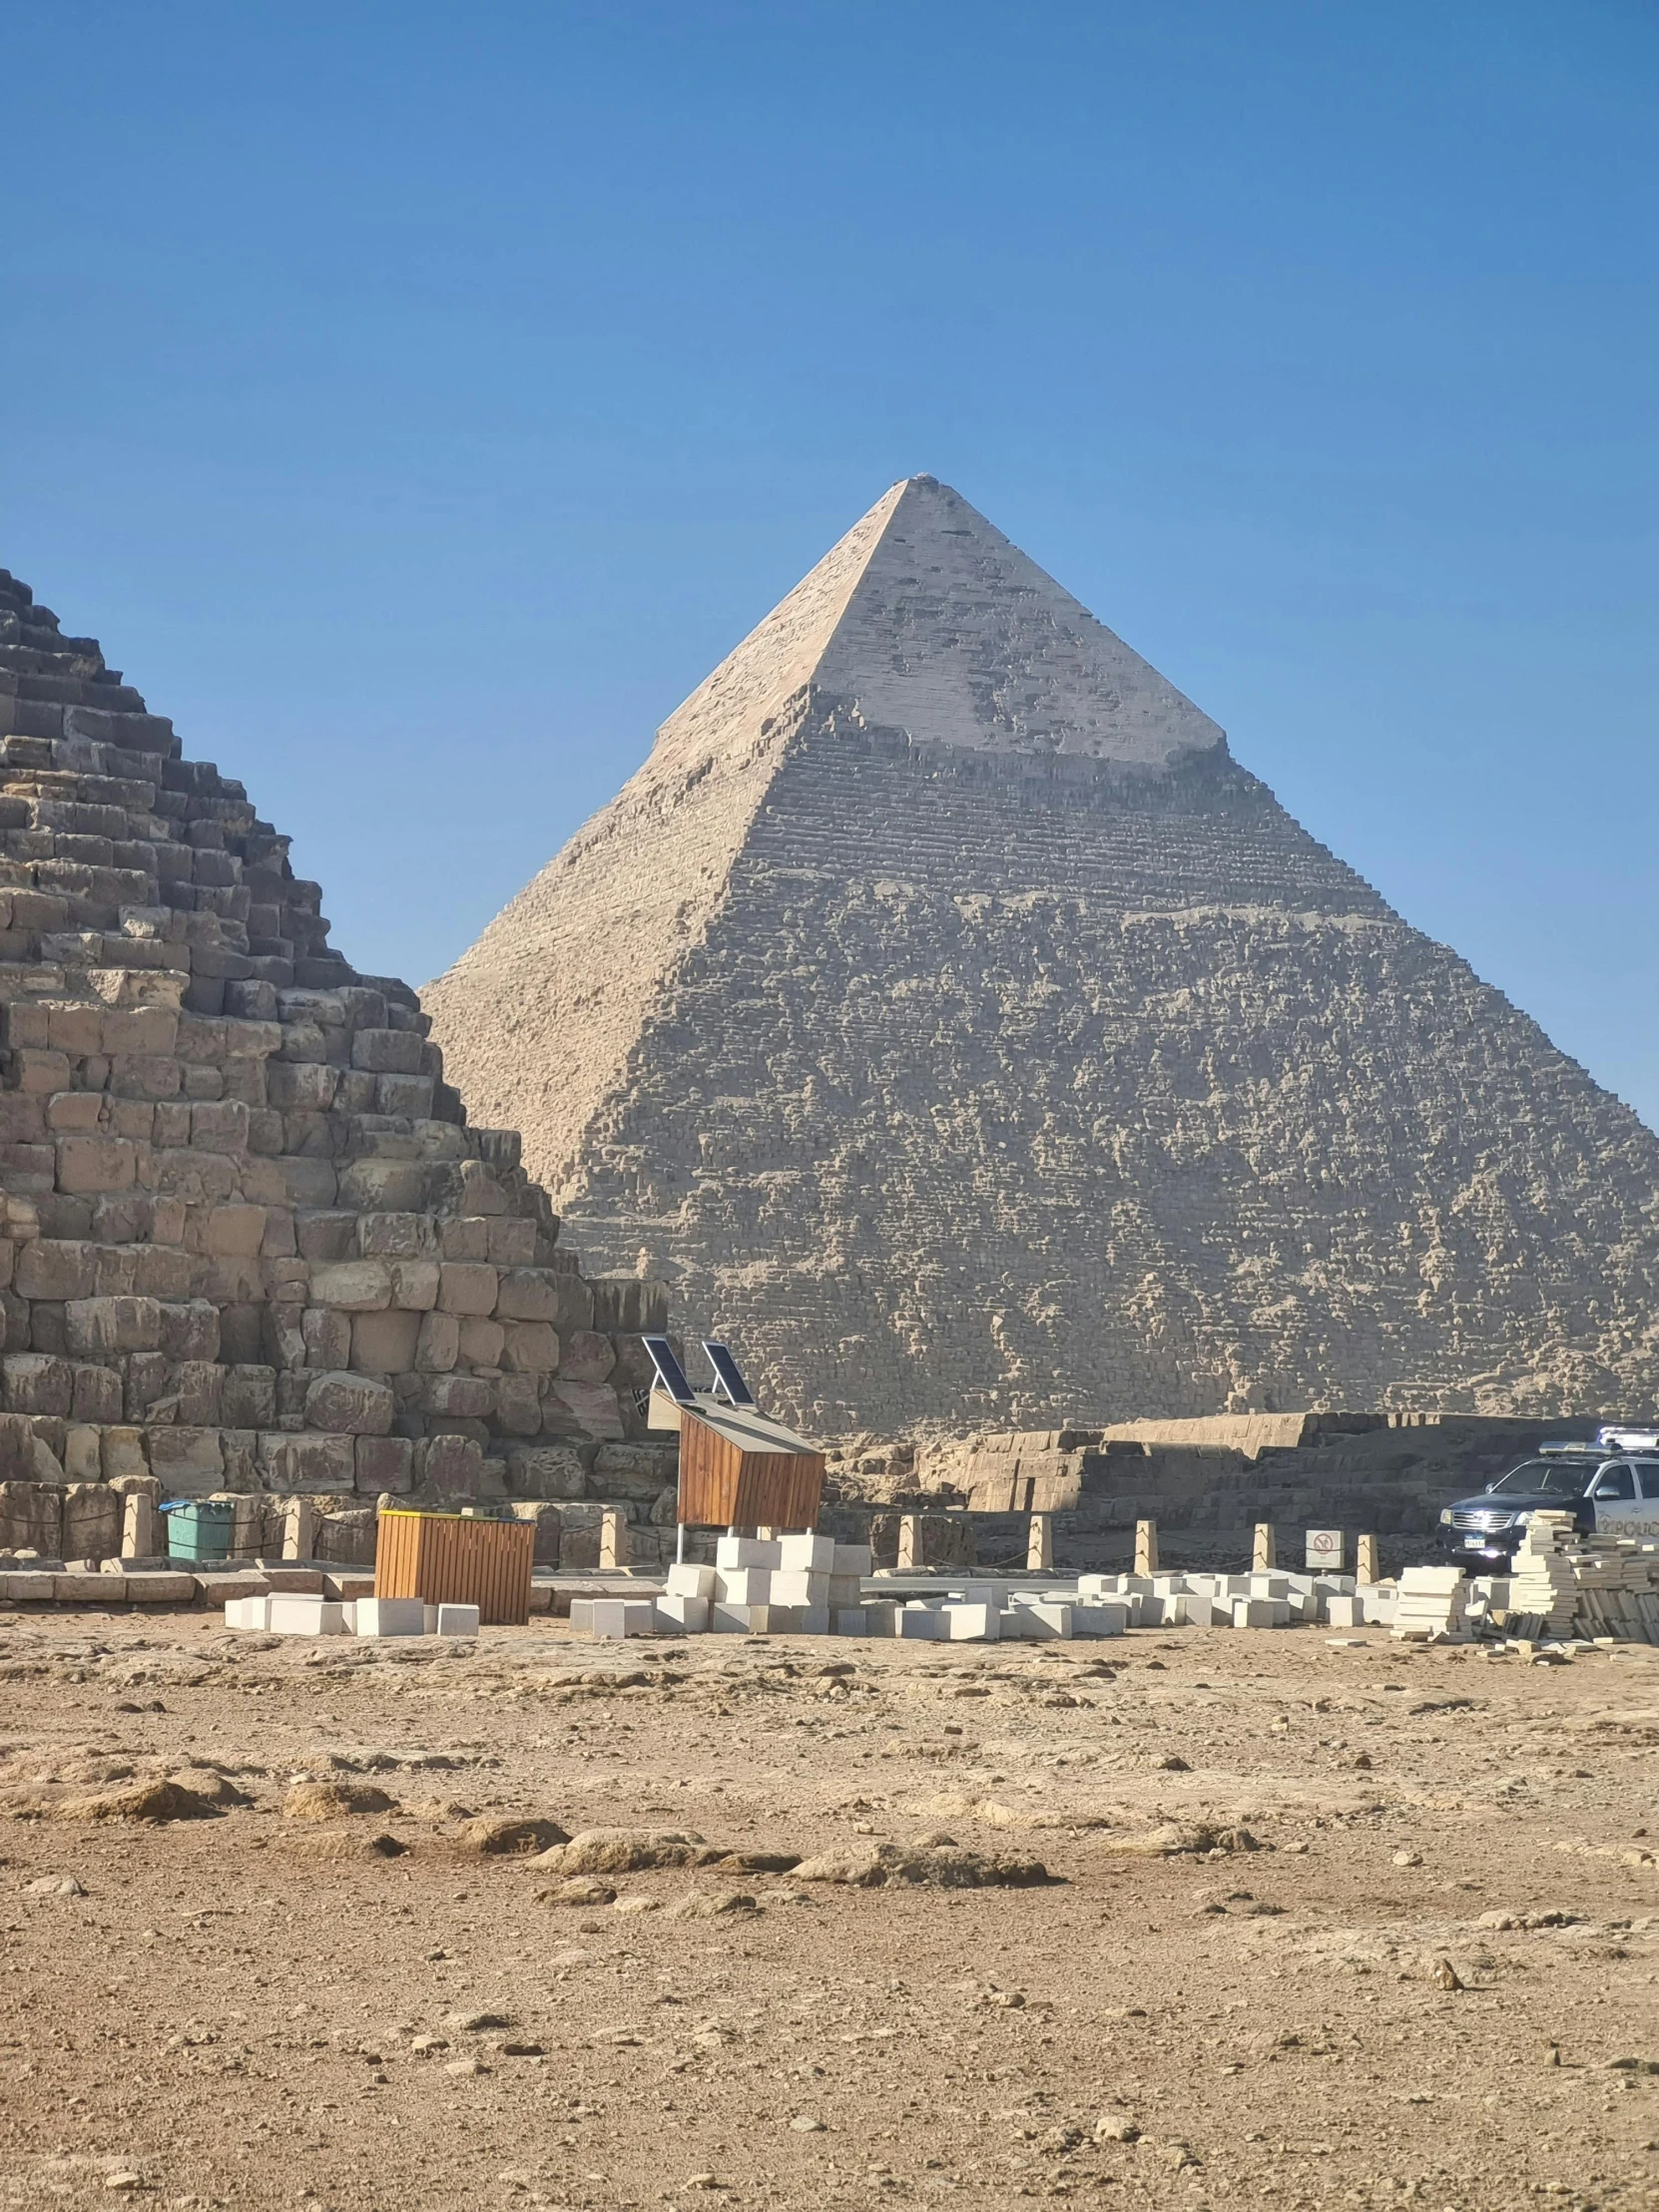 a large pyramid sits in the middle of a desert